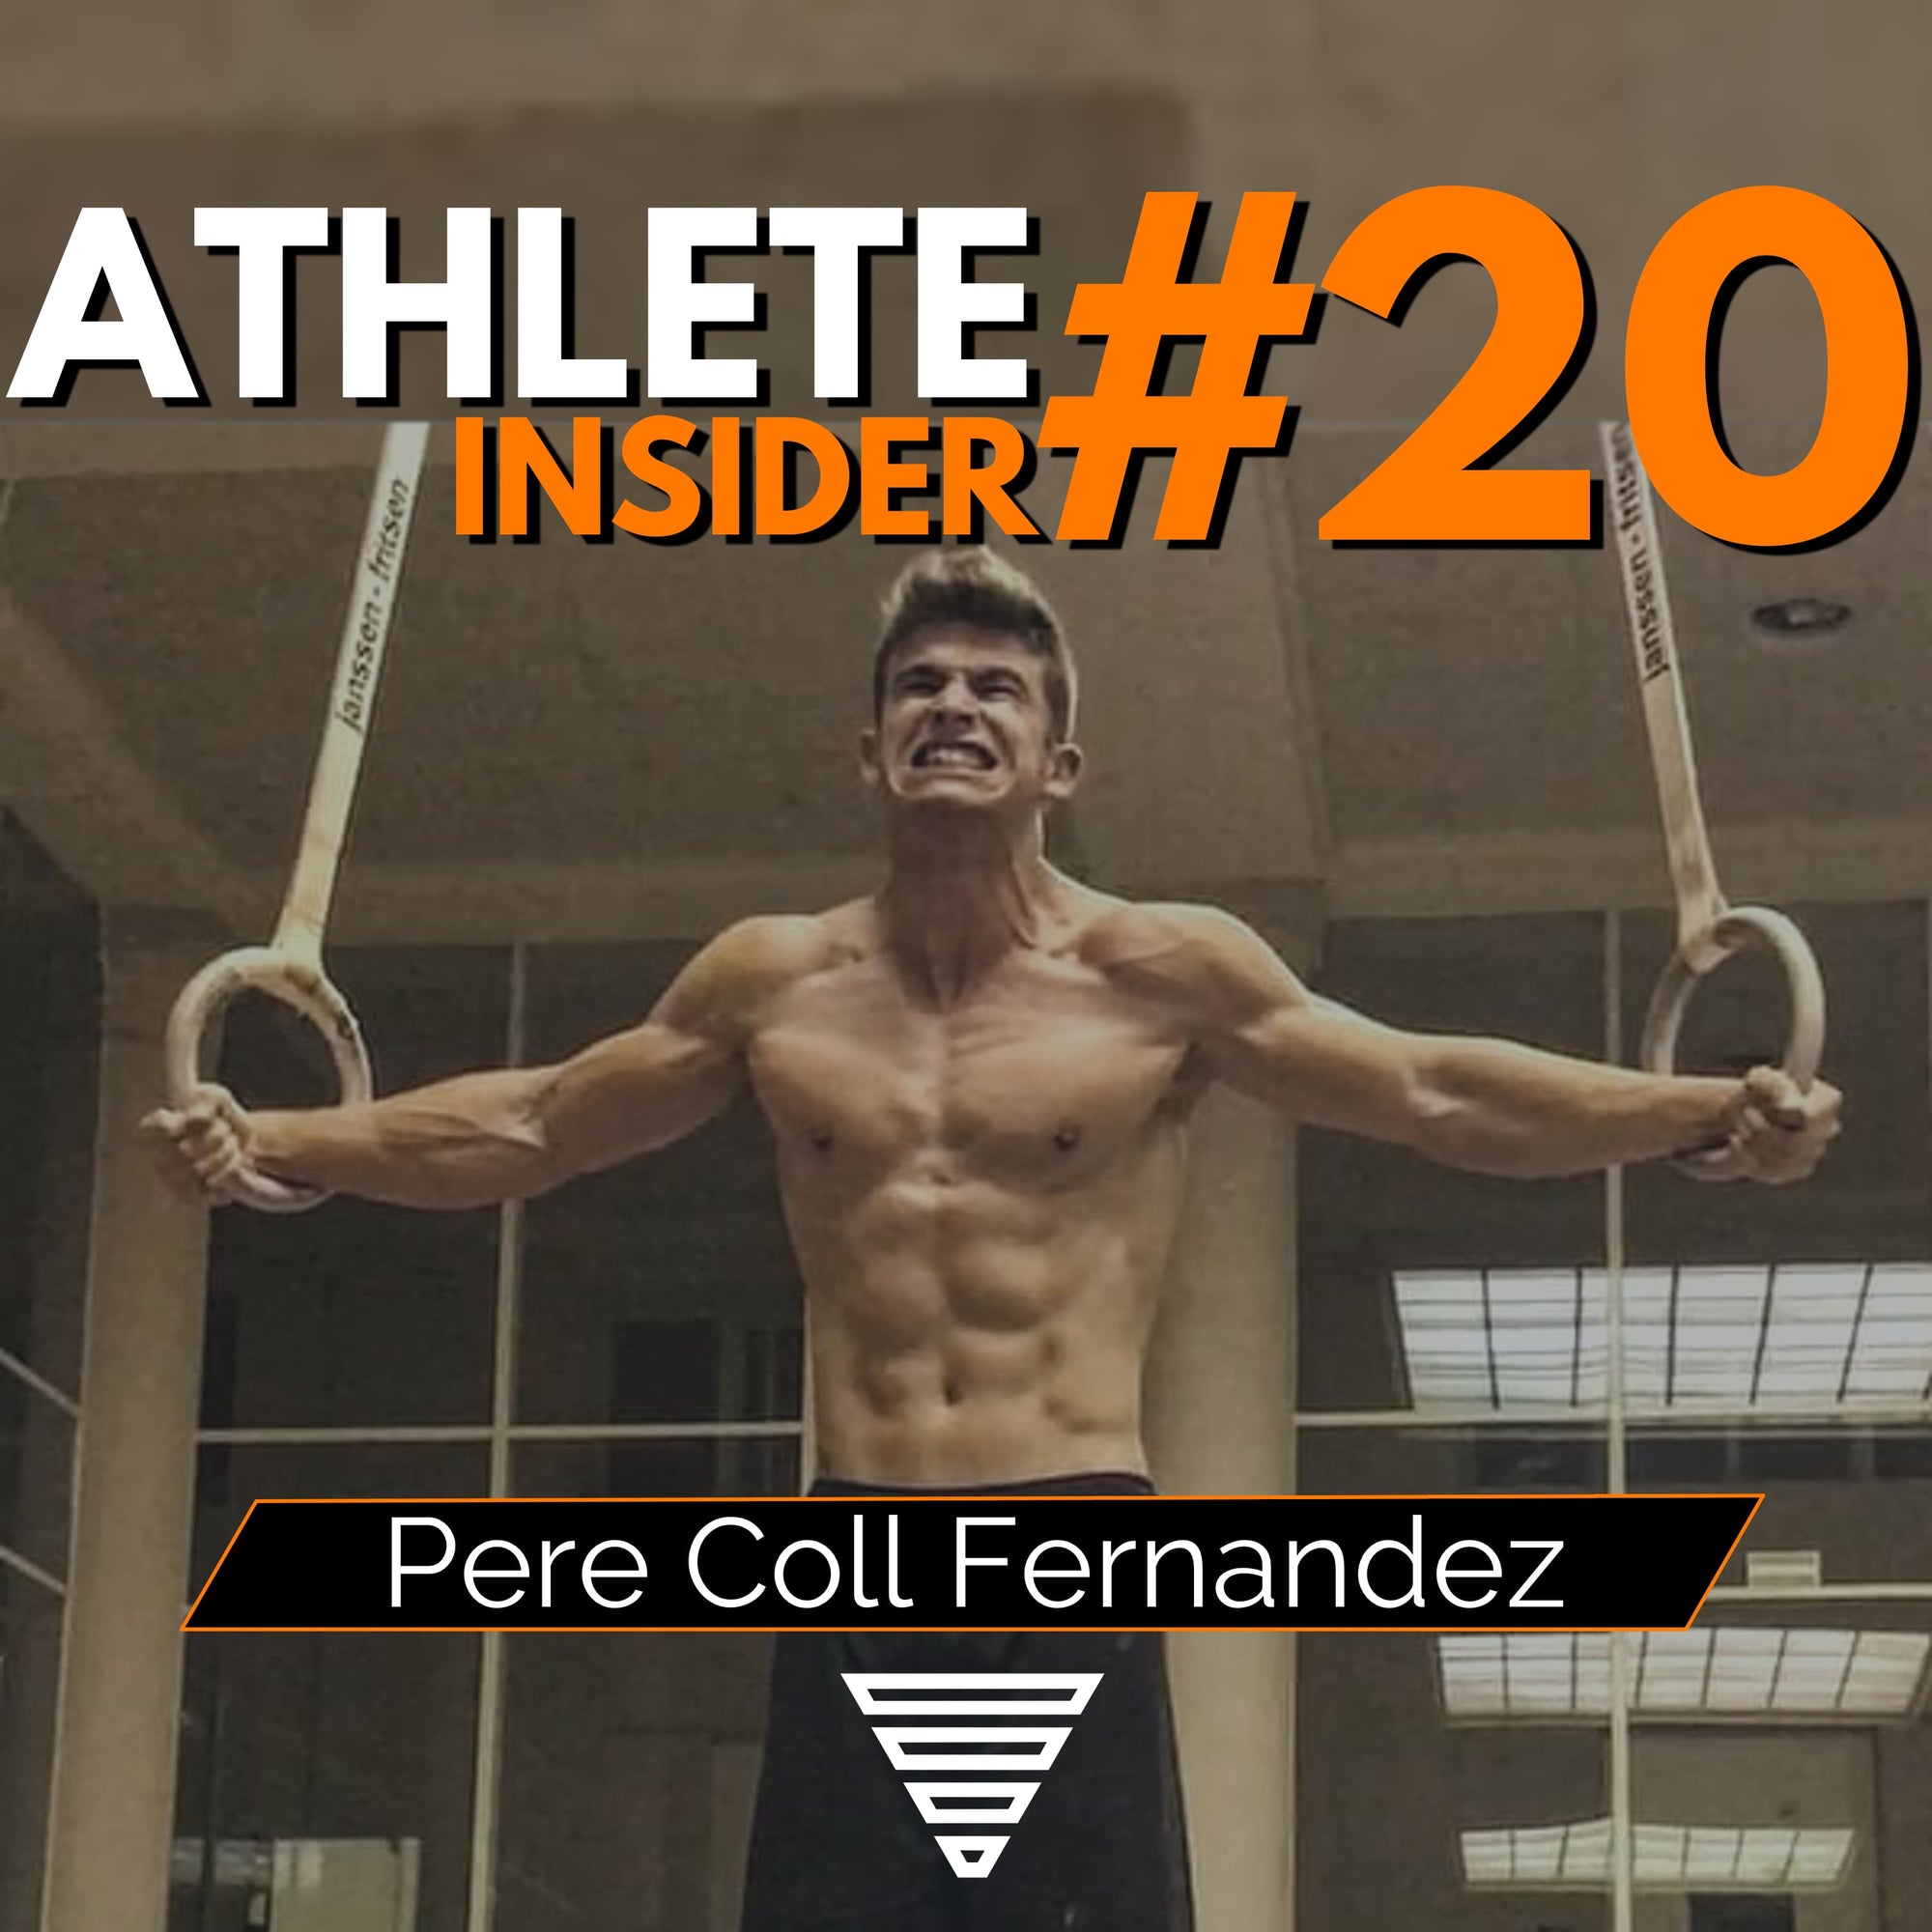 PERE COLL FERNANDEZ | The Smart Record Breaker  | Interview | The Athlete Insider Podcast #20